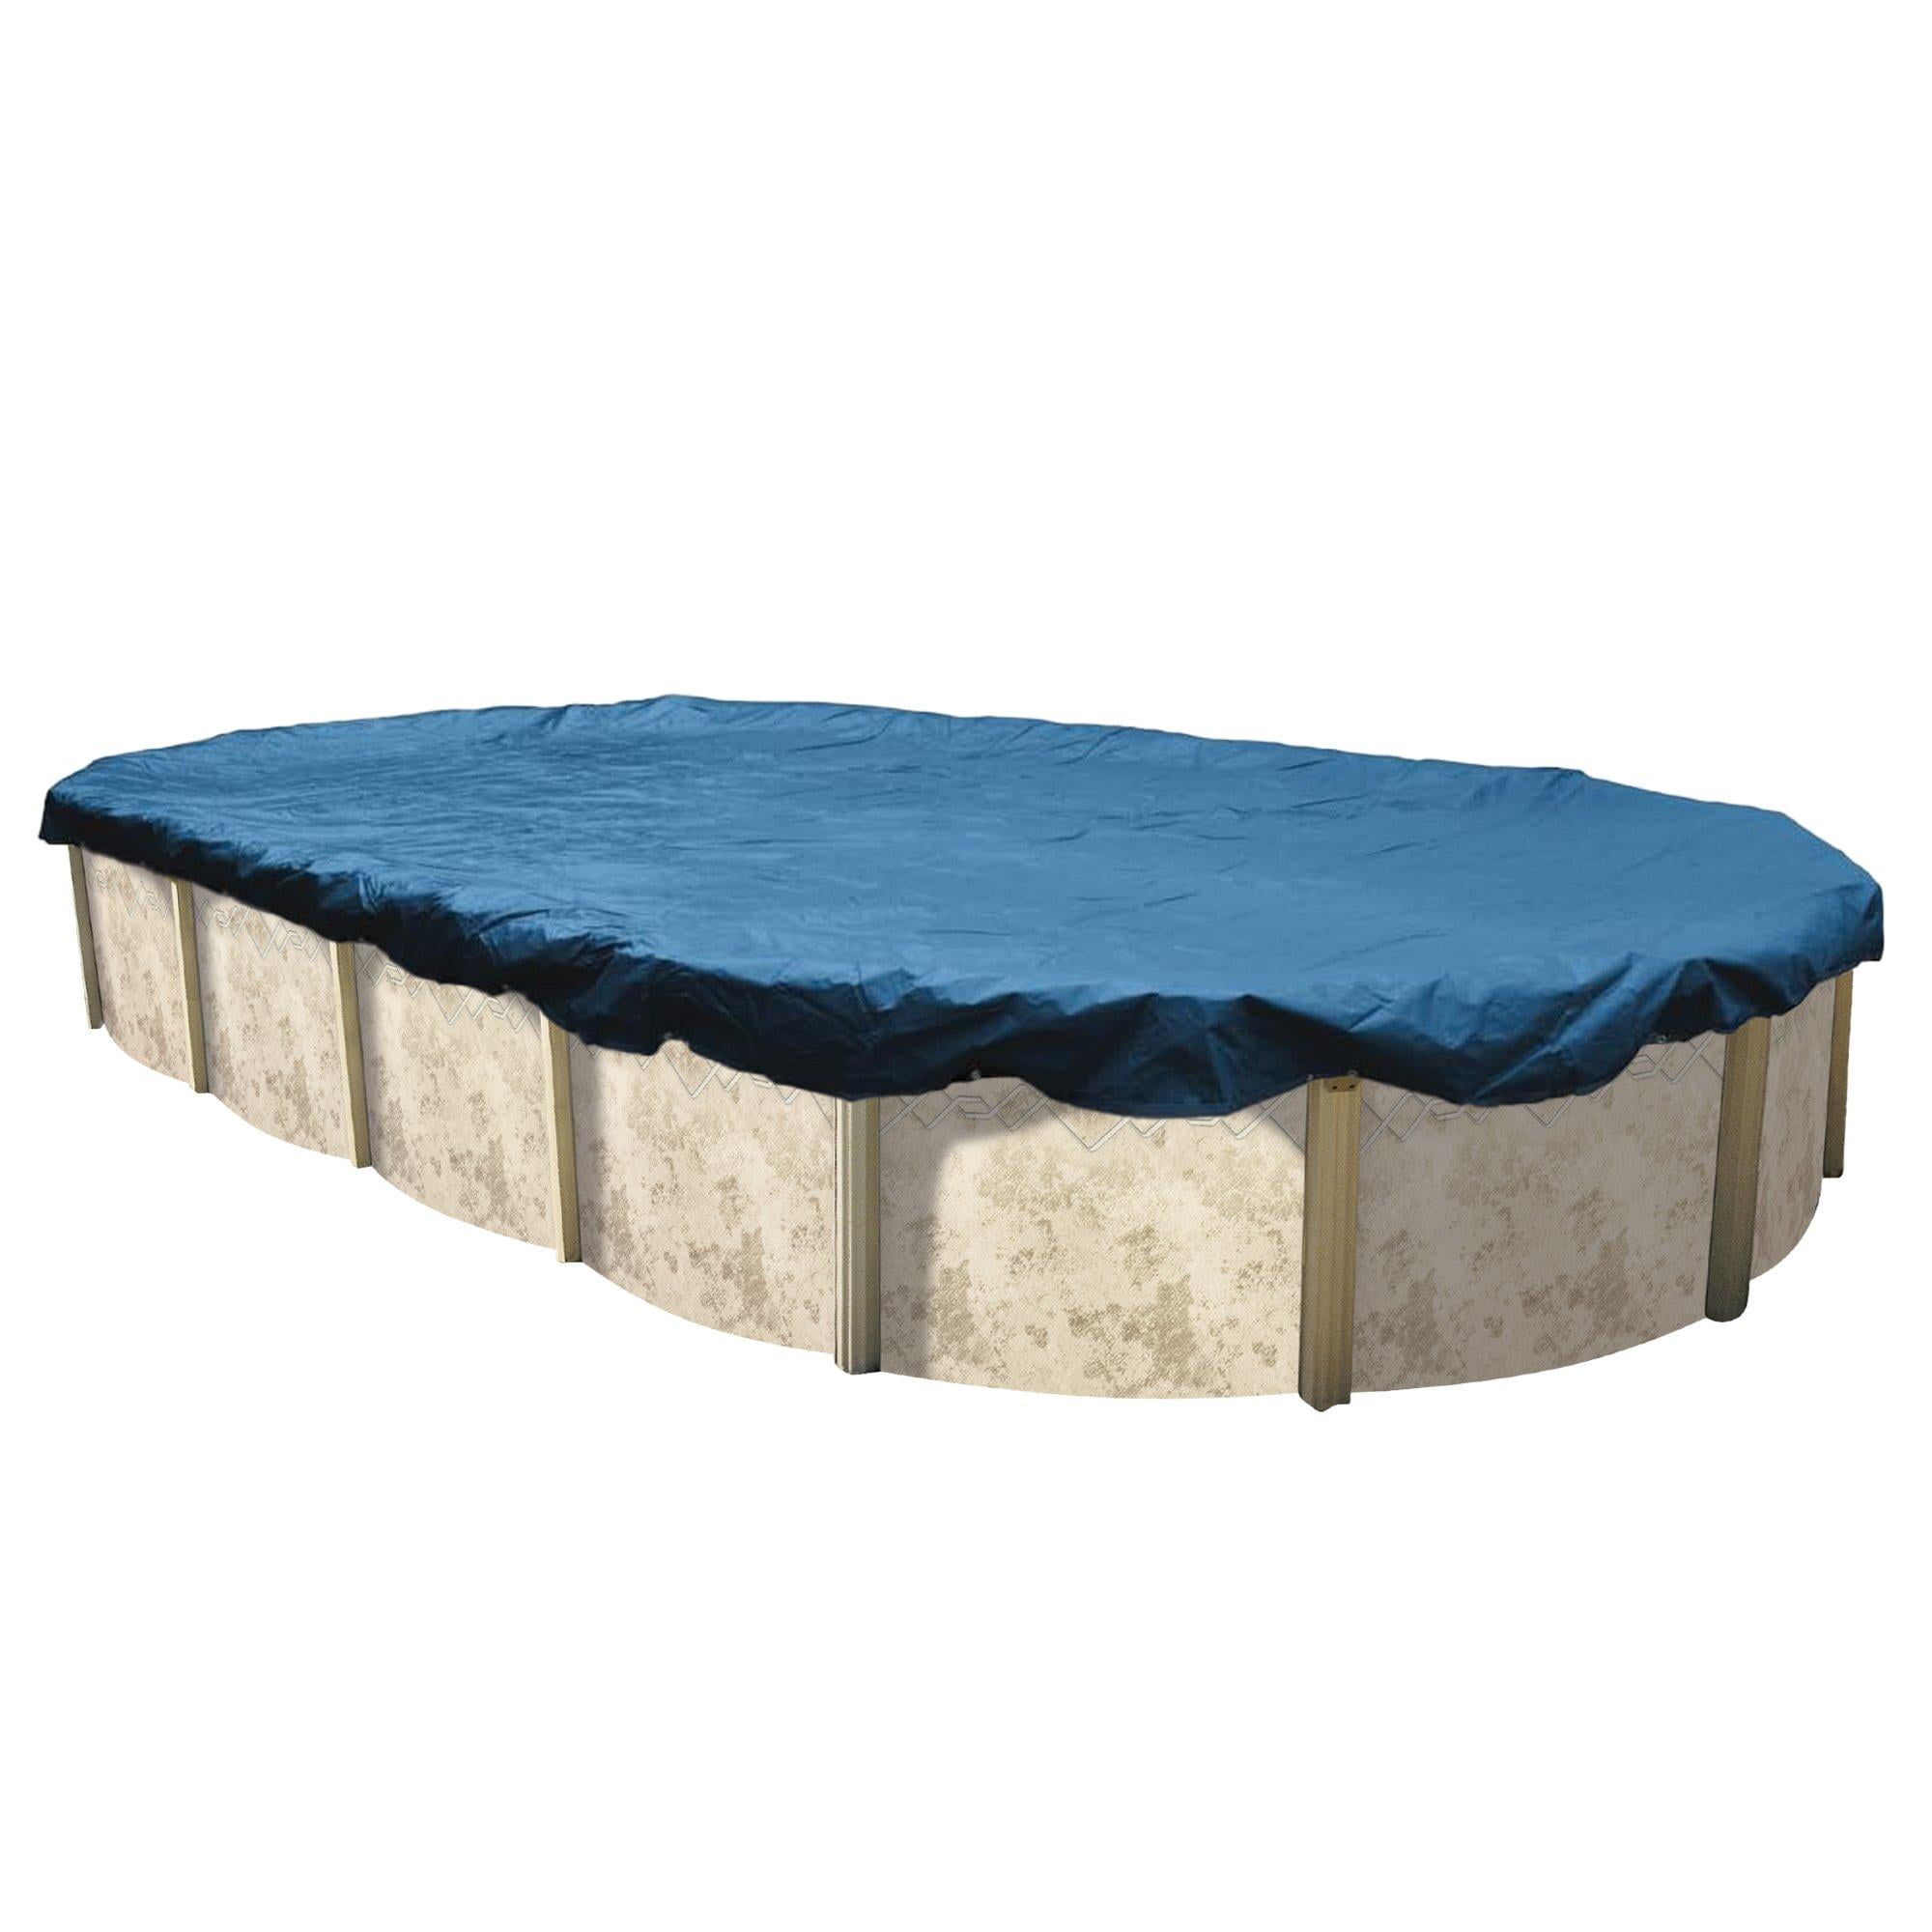 Leslie's In The Swim 18' x 36' Rectangle Inground Winter Cover - Economy -  8 Year - 7 x 7 Scrim MIDWDR1836 